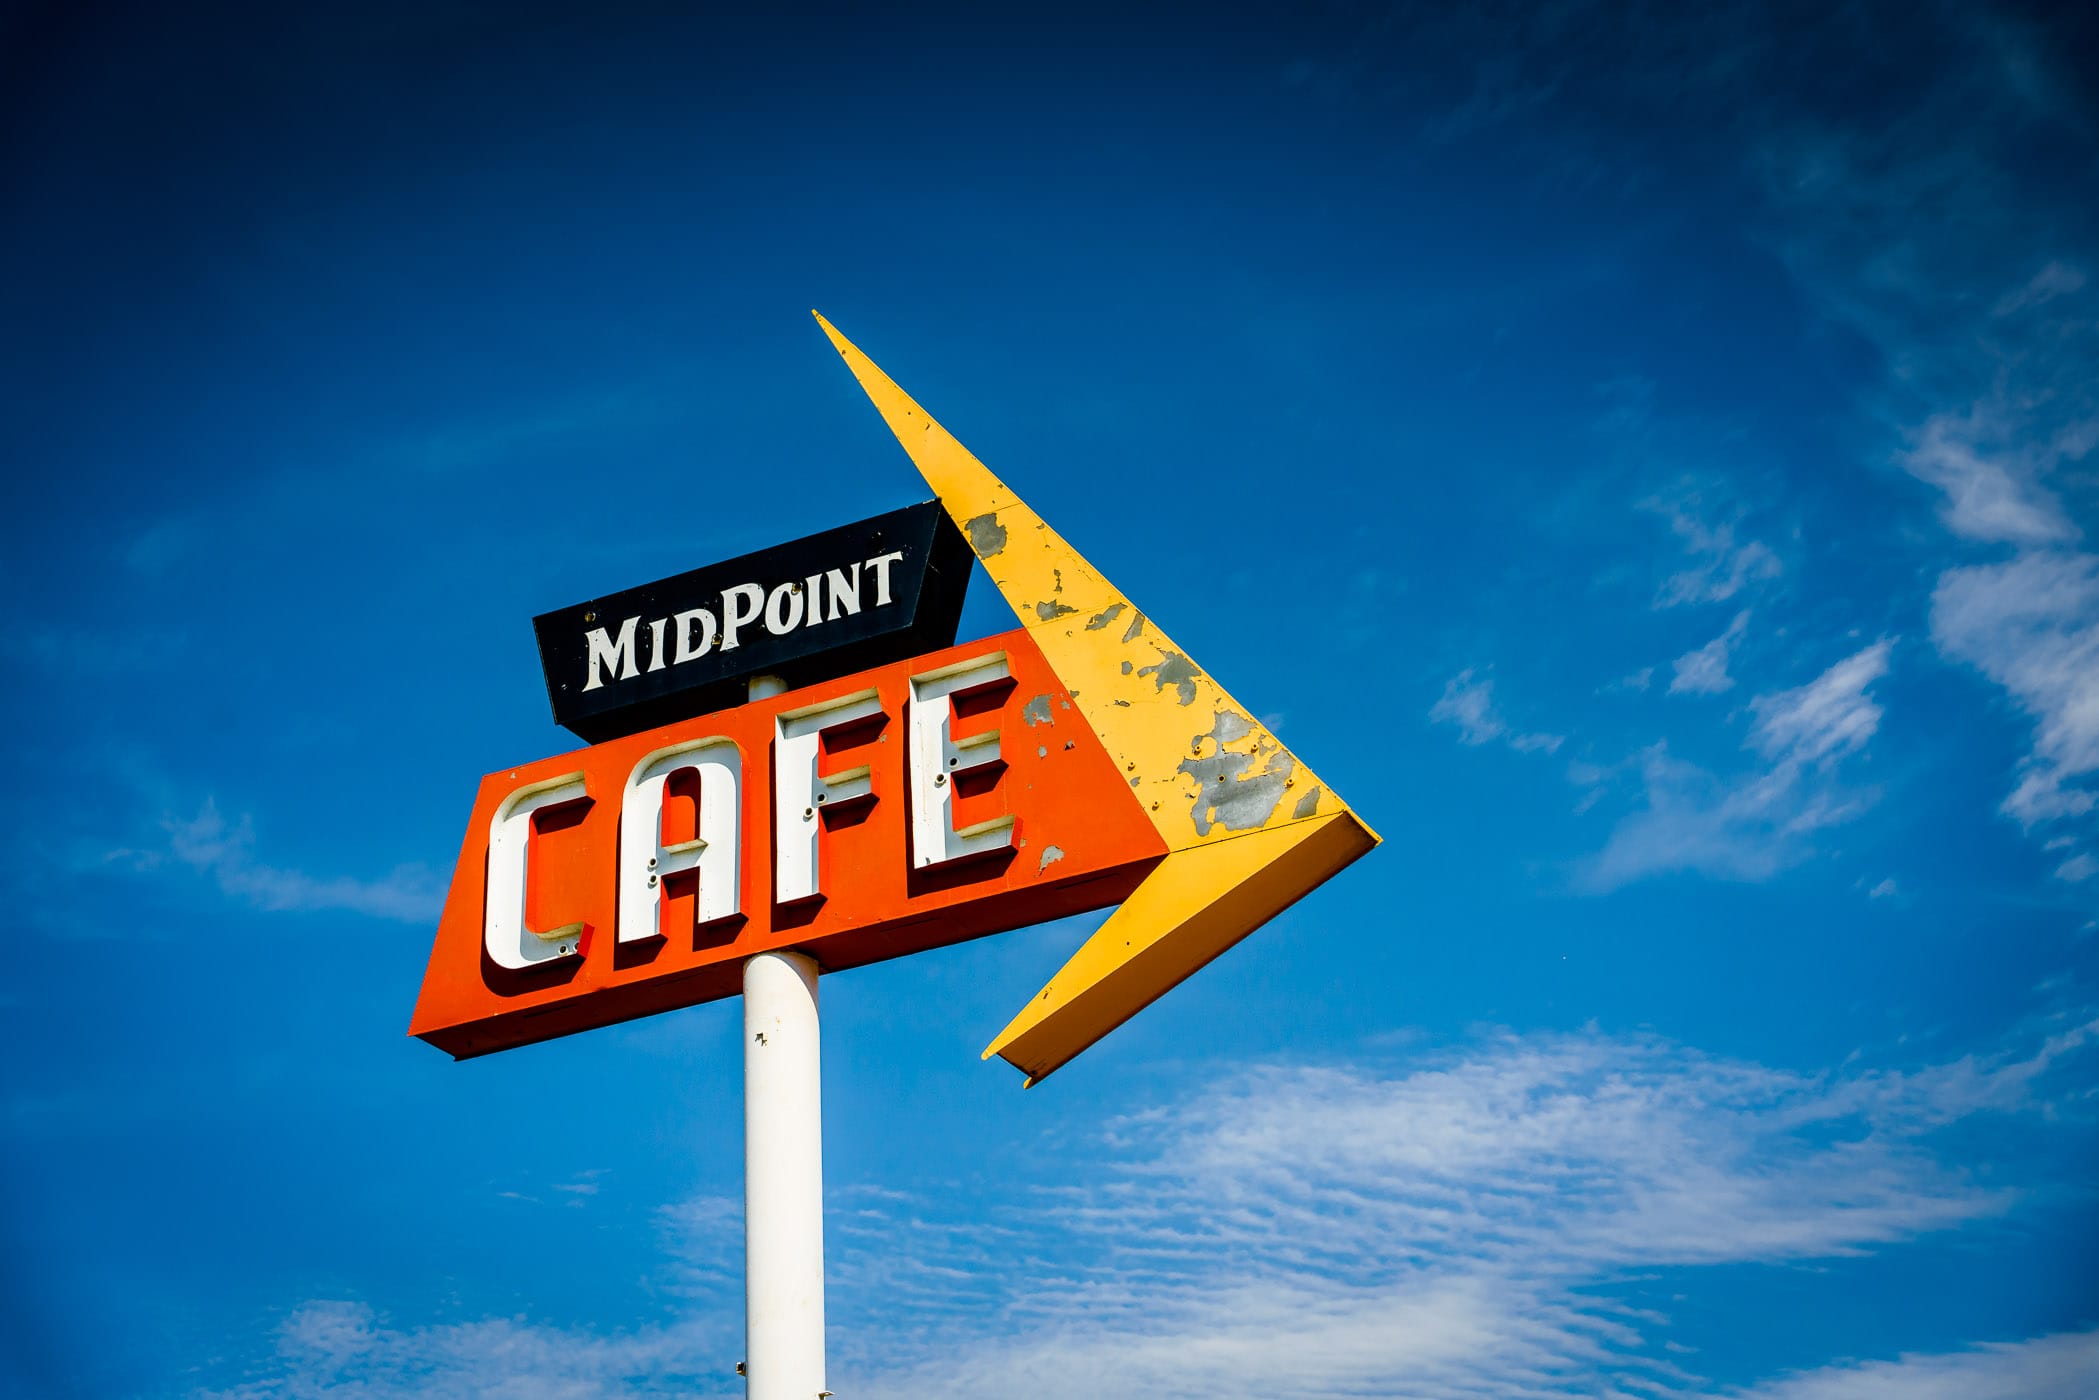 The sign for Adrian, Texas' MidPoint Cafe rises into the Texas Panhandle sky.